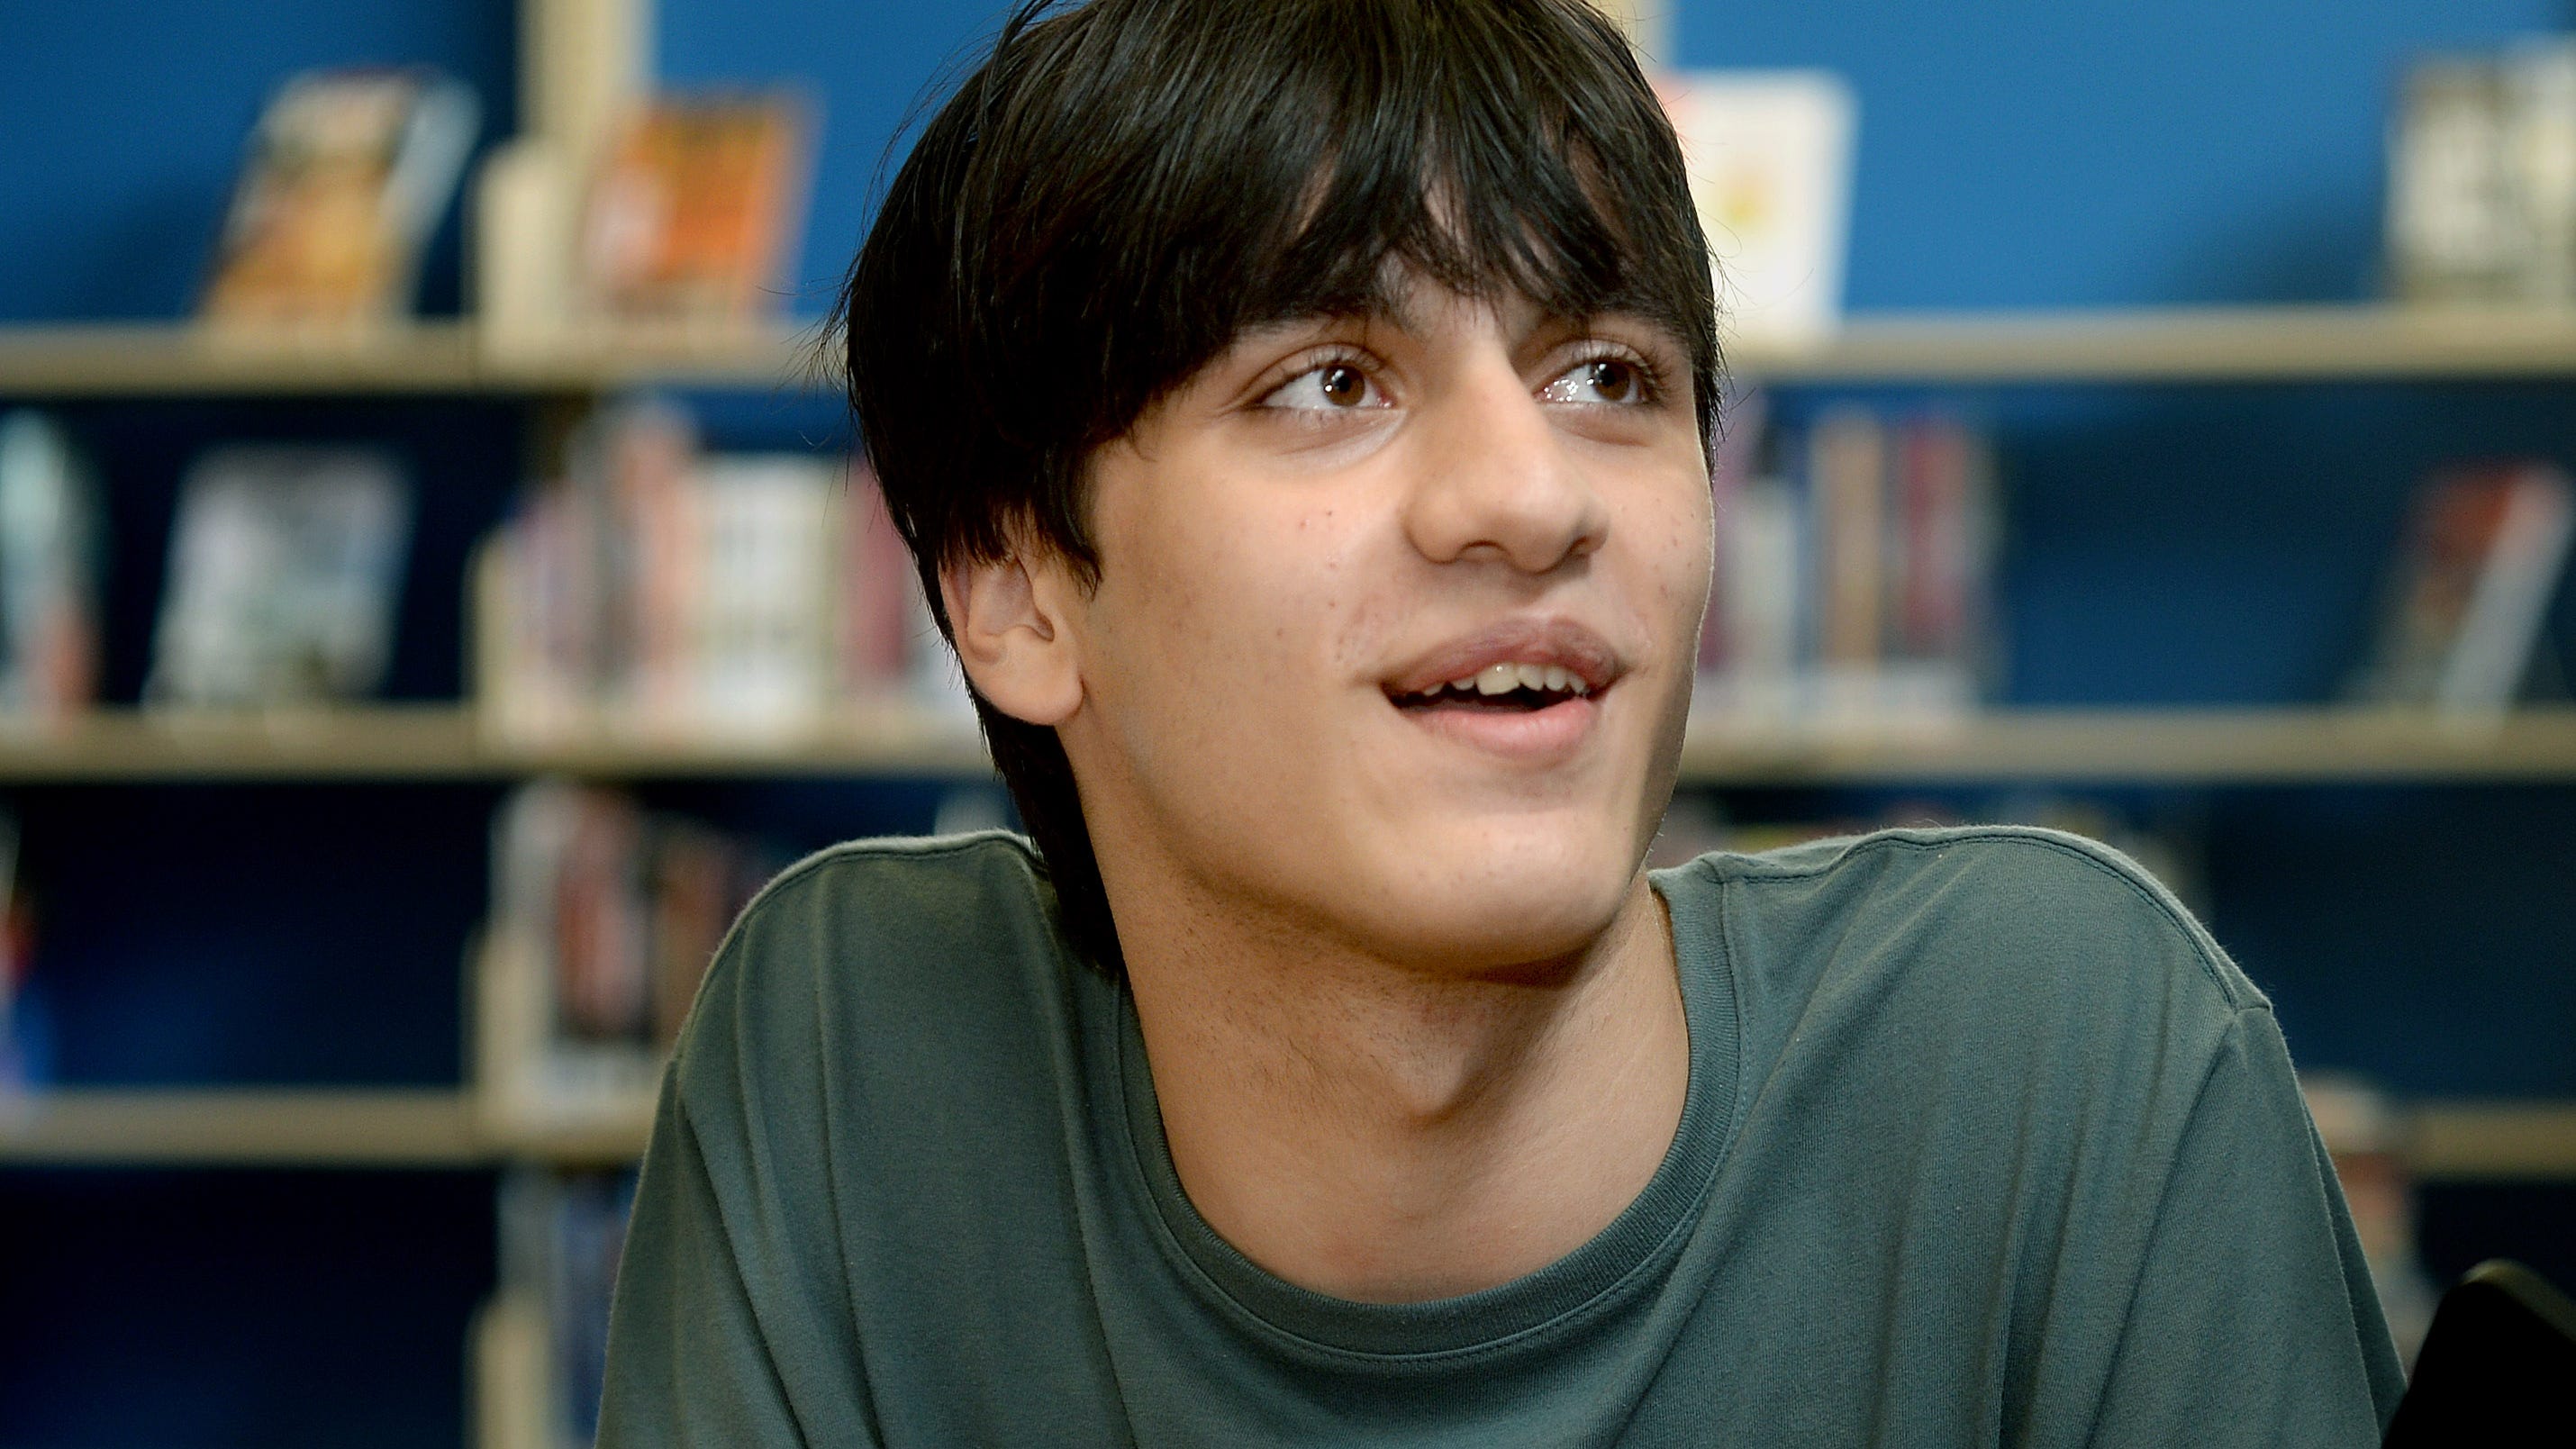 Meet the SHS senior who fled the Taliban for Springfield